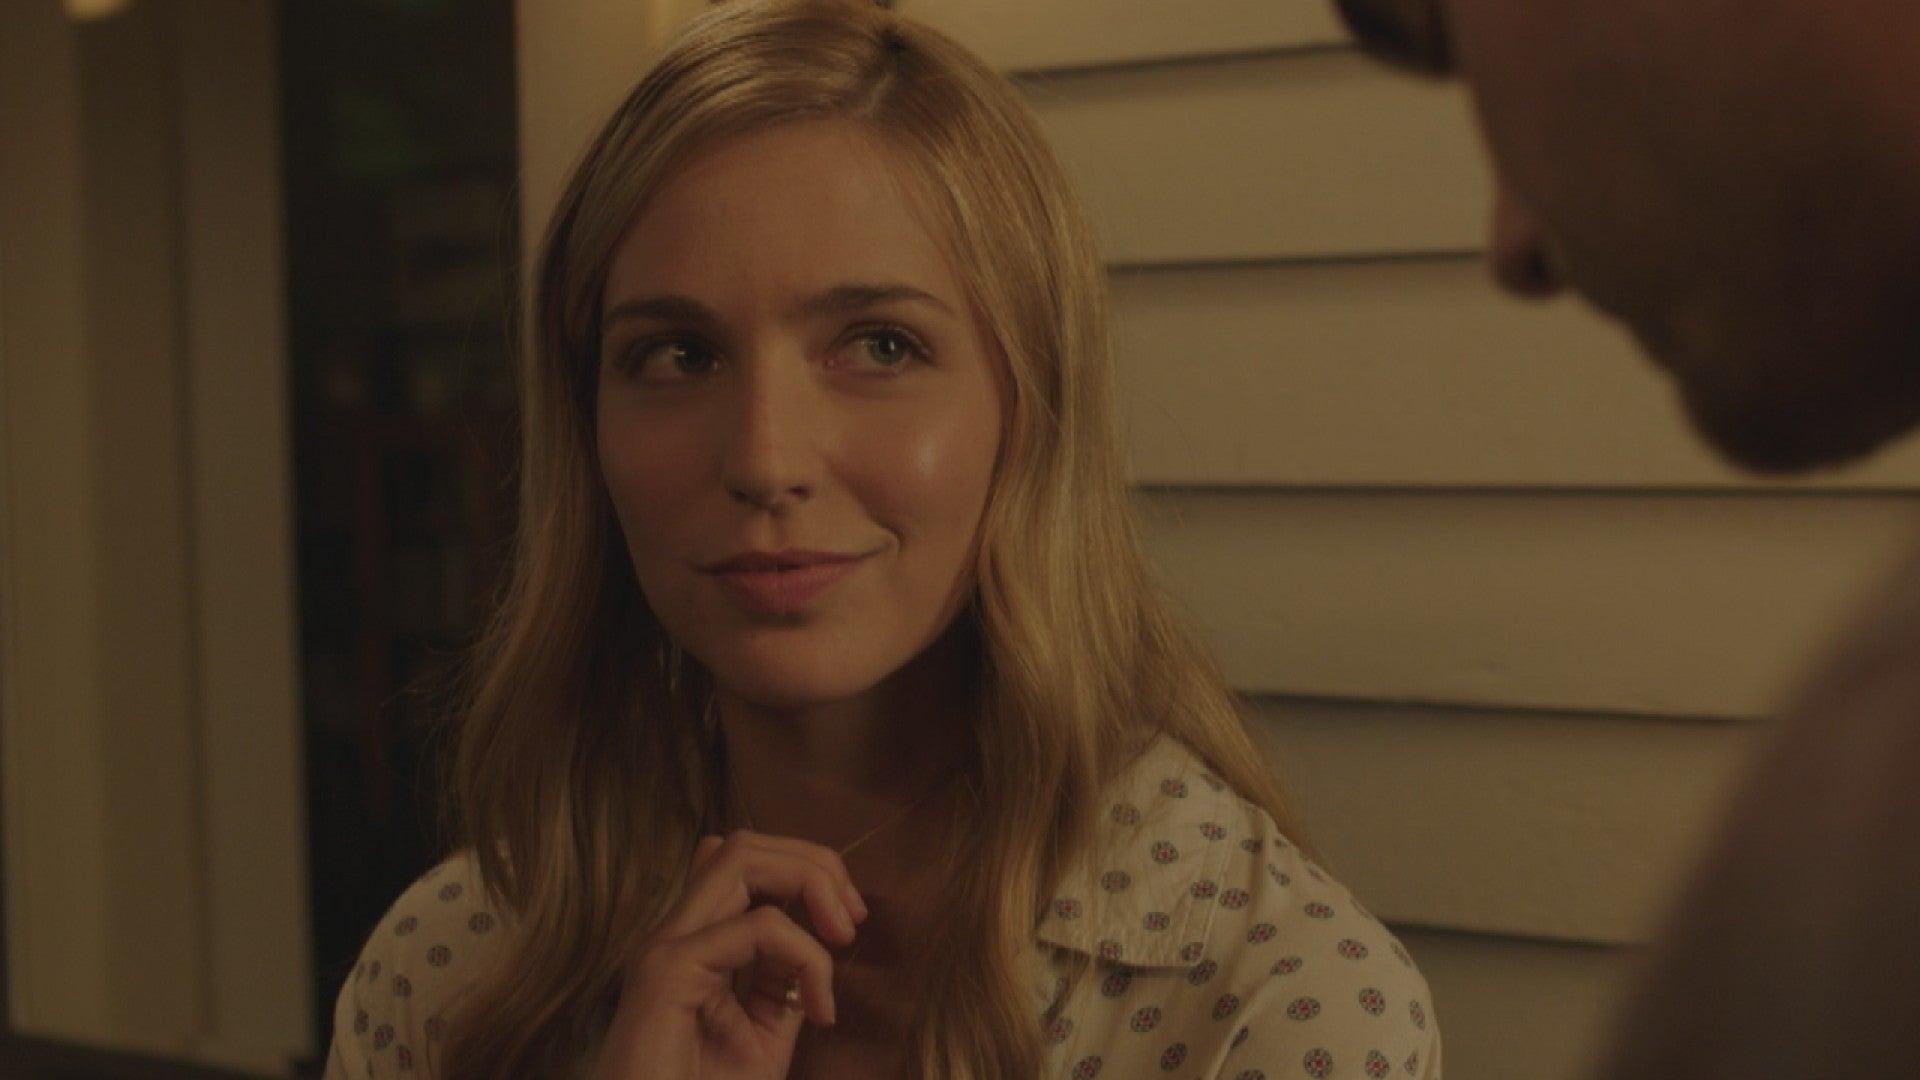 Jessica Rothe Had a Breakthrough Year - Even With That